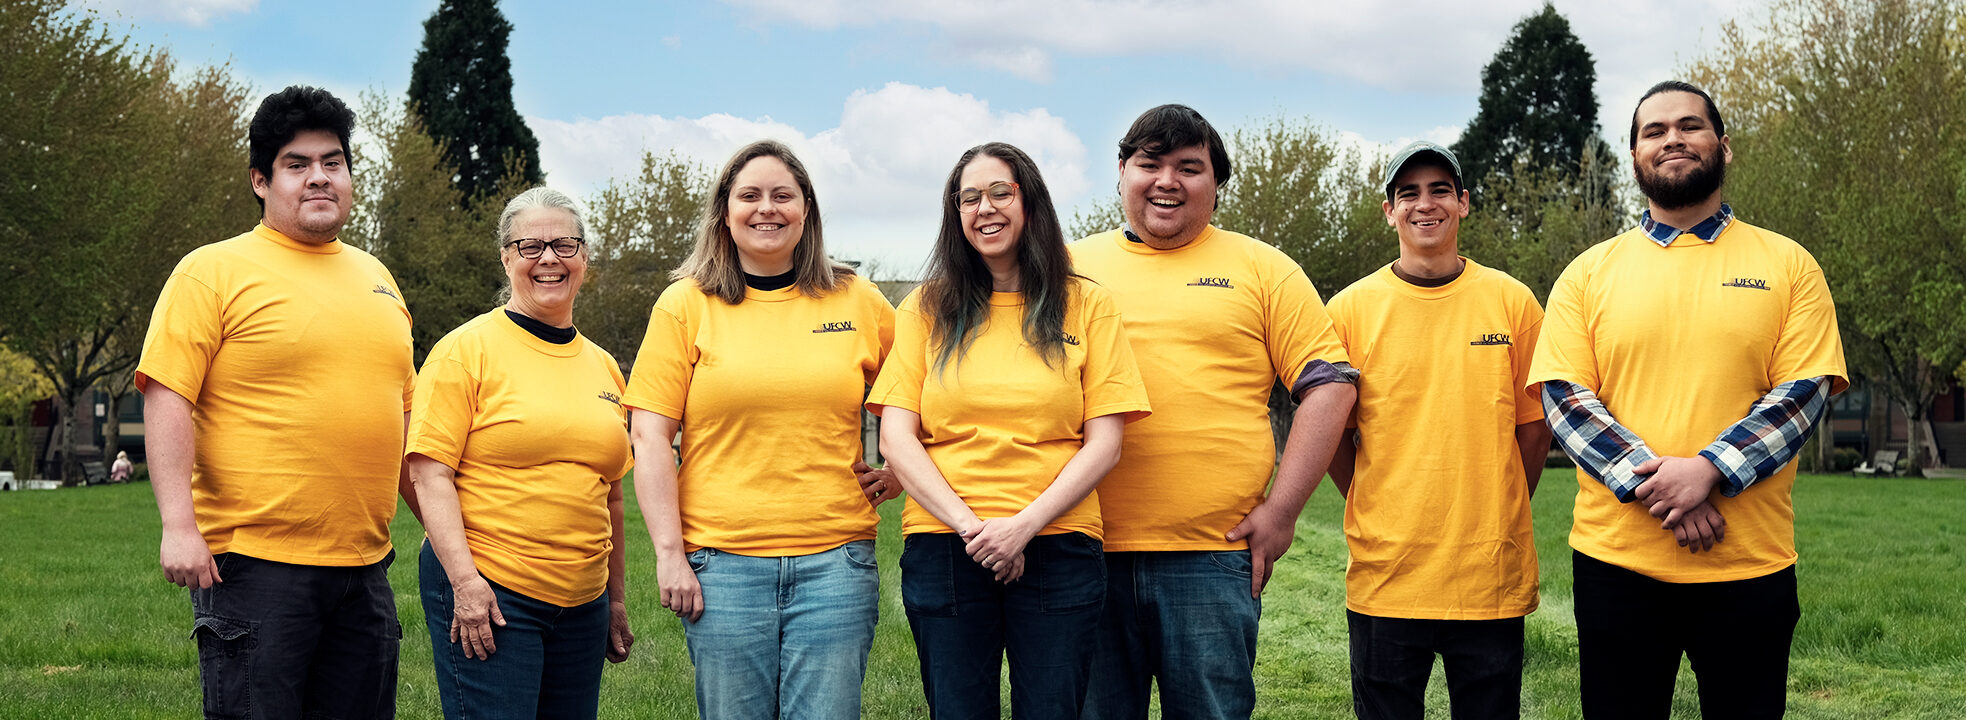 Seven members of the UFCW New Seasons team stand shoulder to shoulder outdoors, with a blue sky and fluffy clouds behind them. All are wearing UFCW gold shirts and looking at the camera proudly.